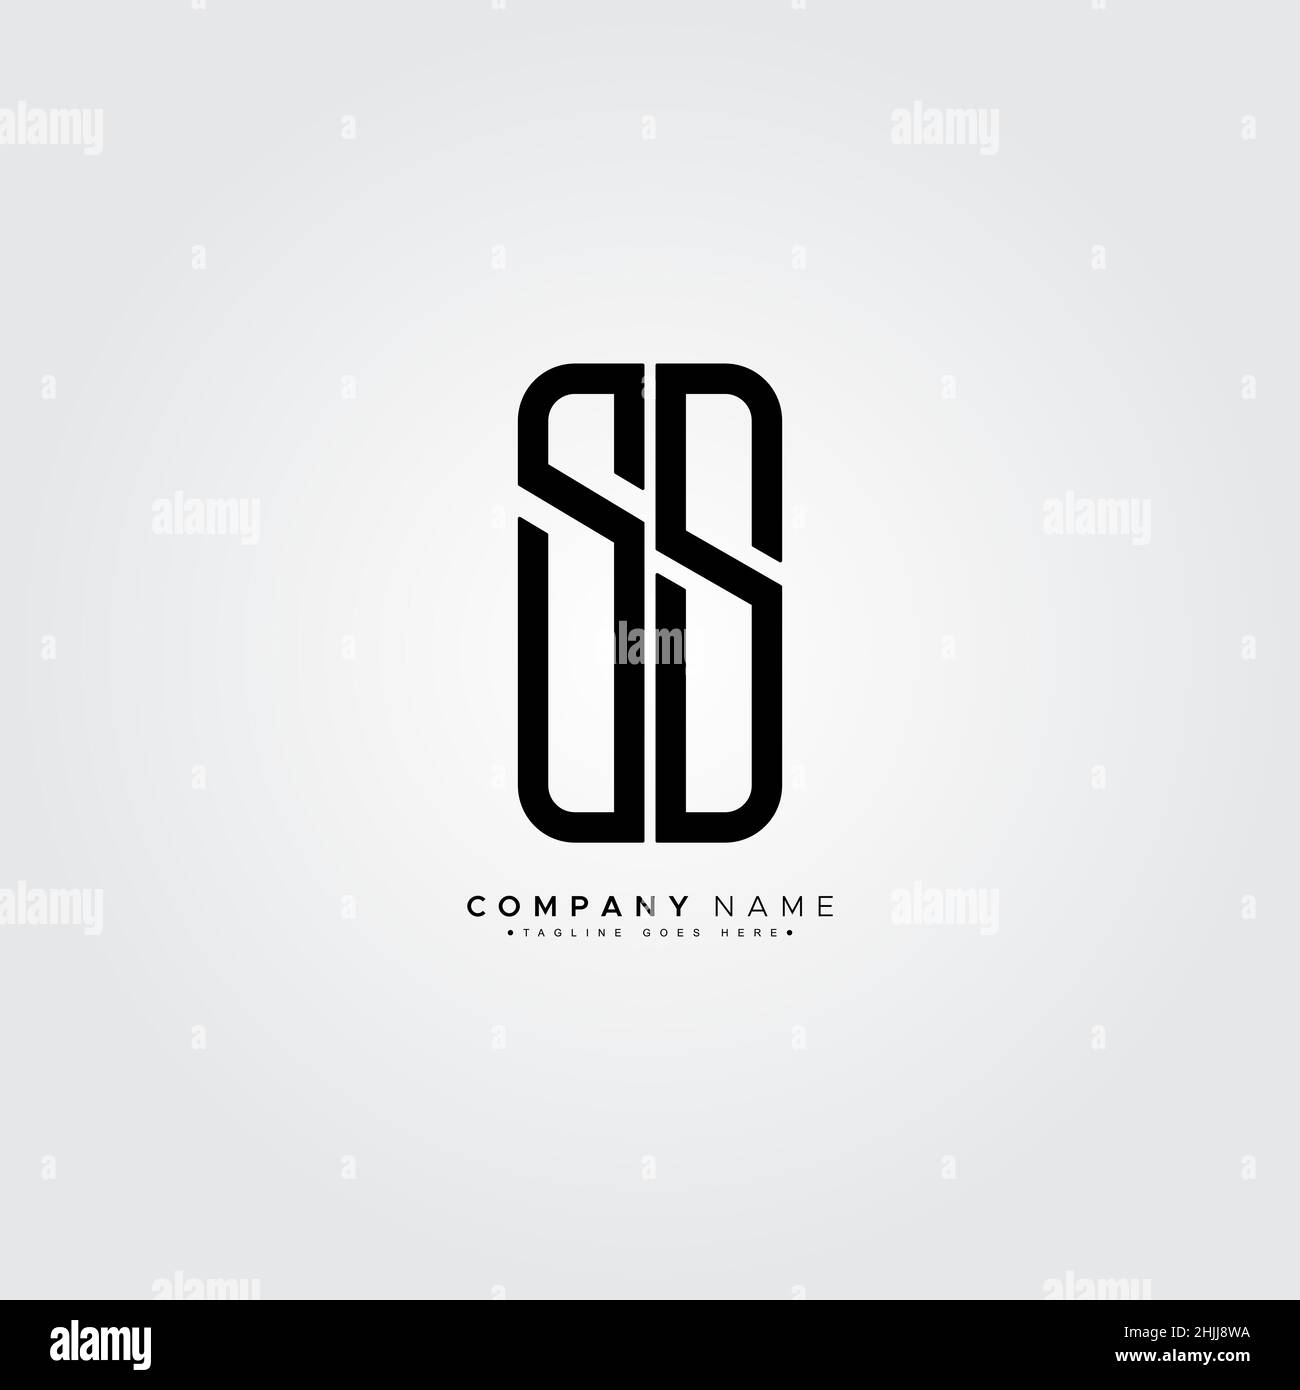 Ss logo Black and White Stock Photos & Images - Alamy